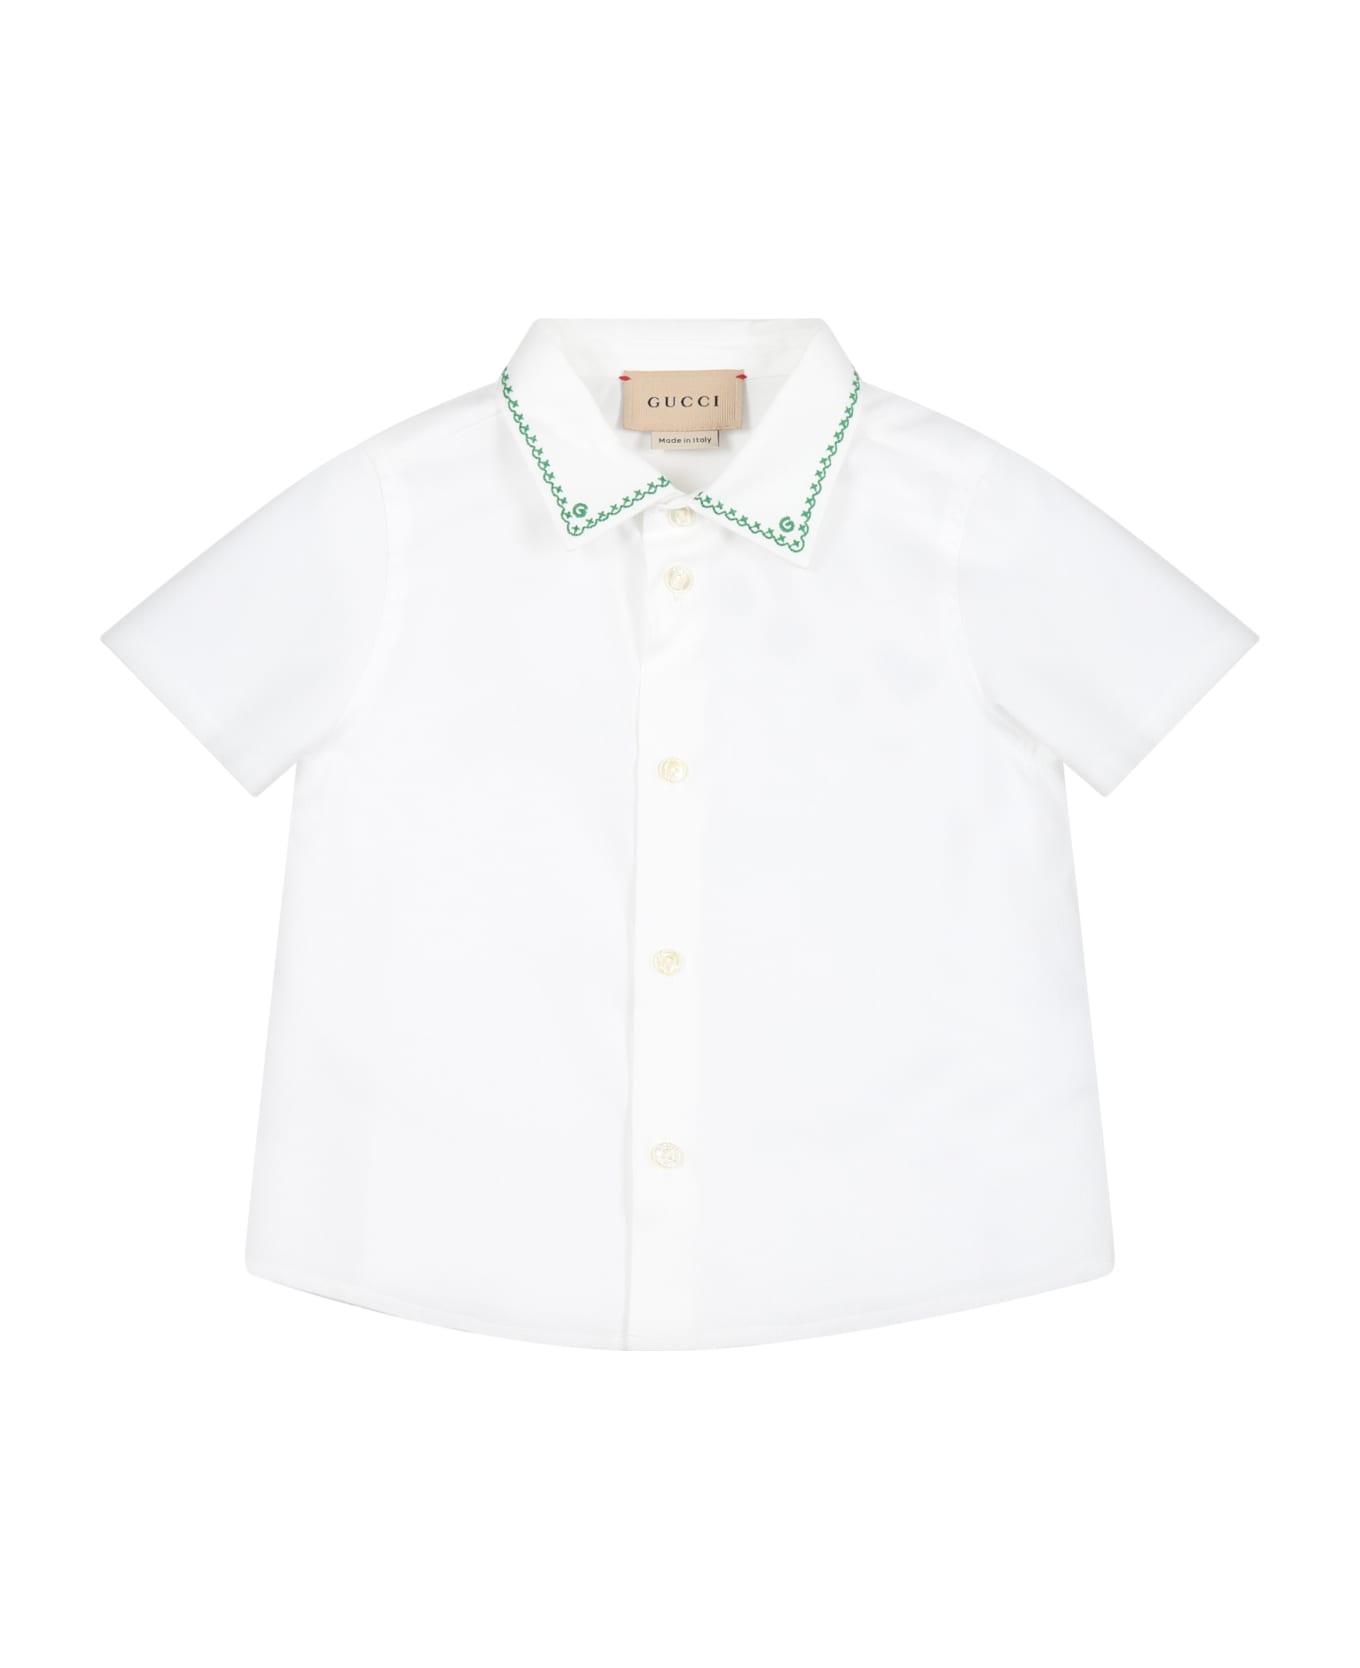 Gucci White Shirt For Baby Boy With Embroideries And Logo - White シャツ